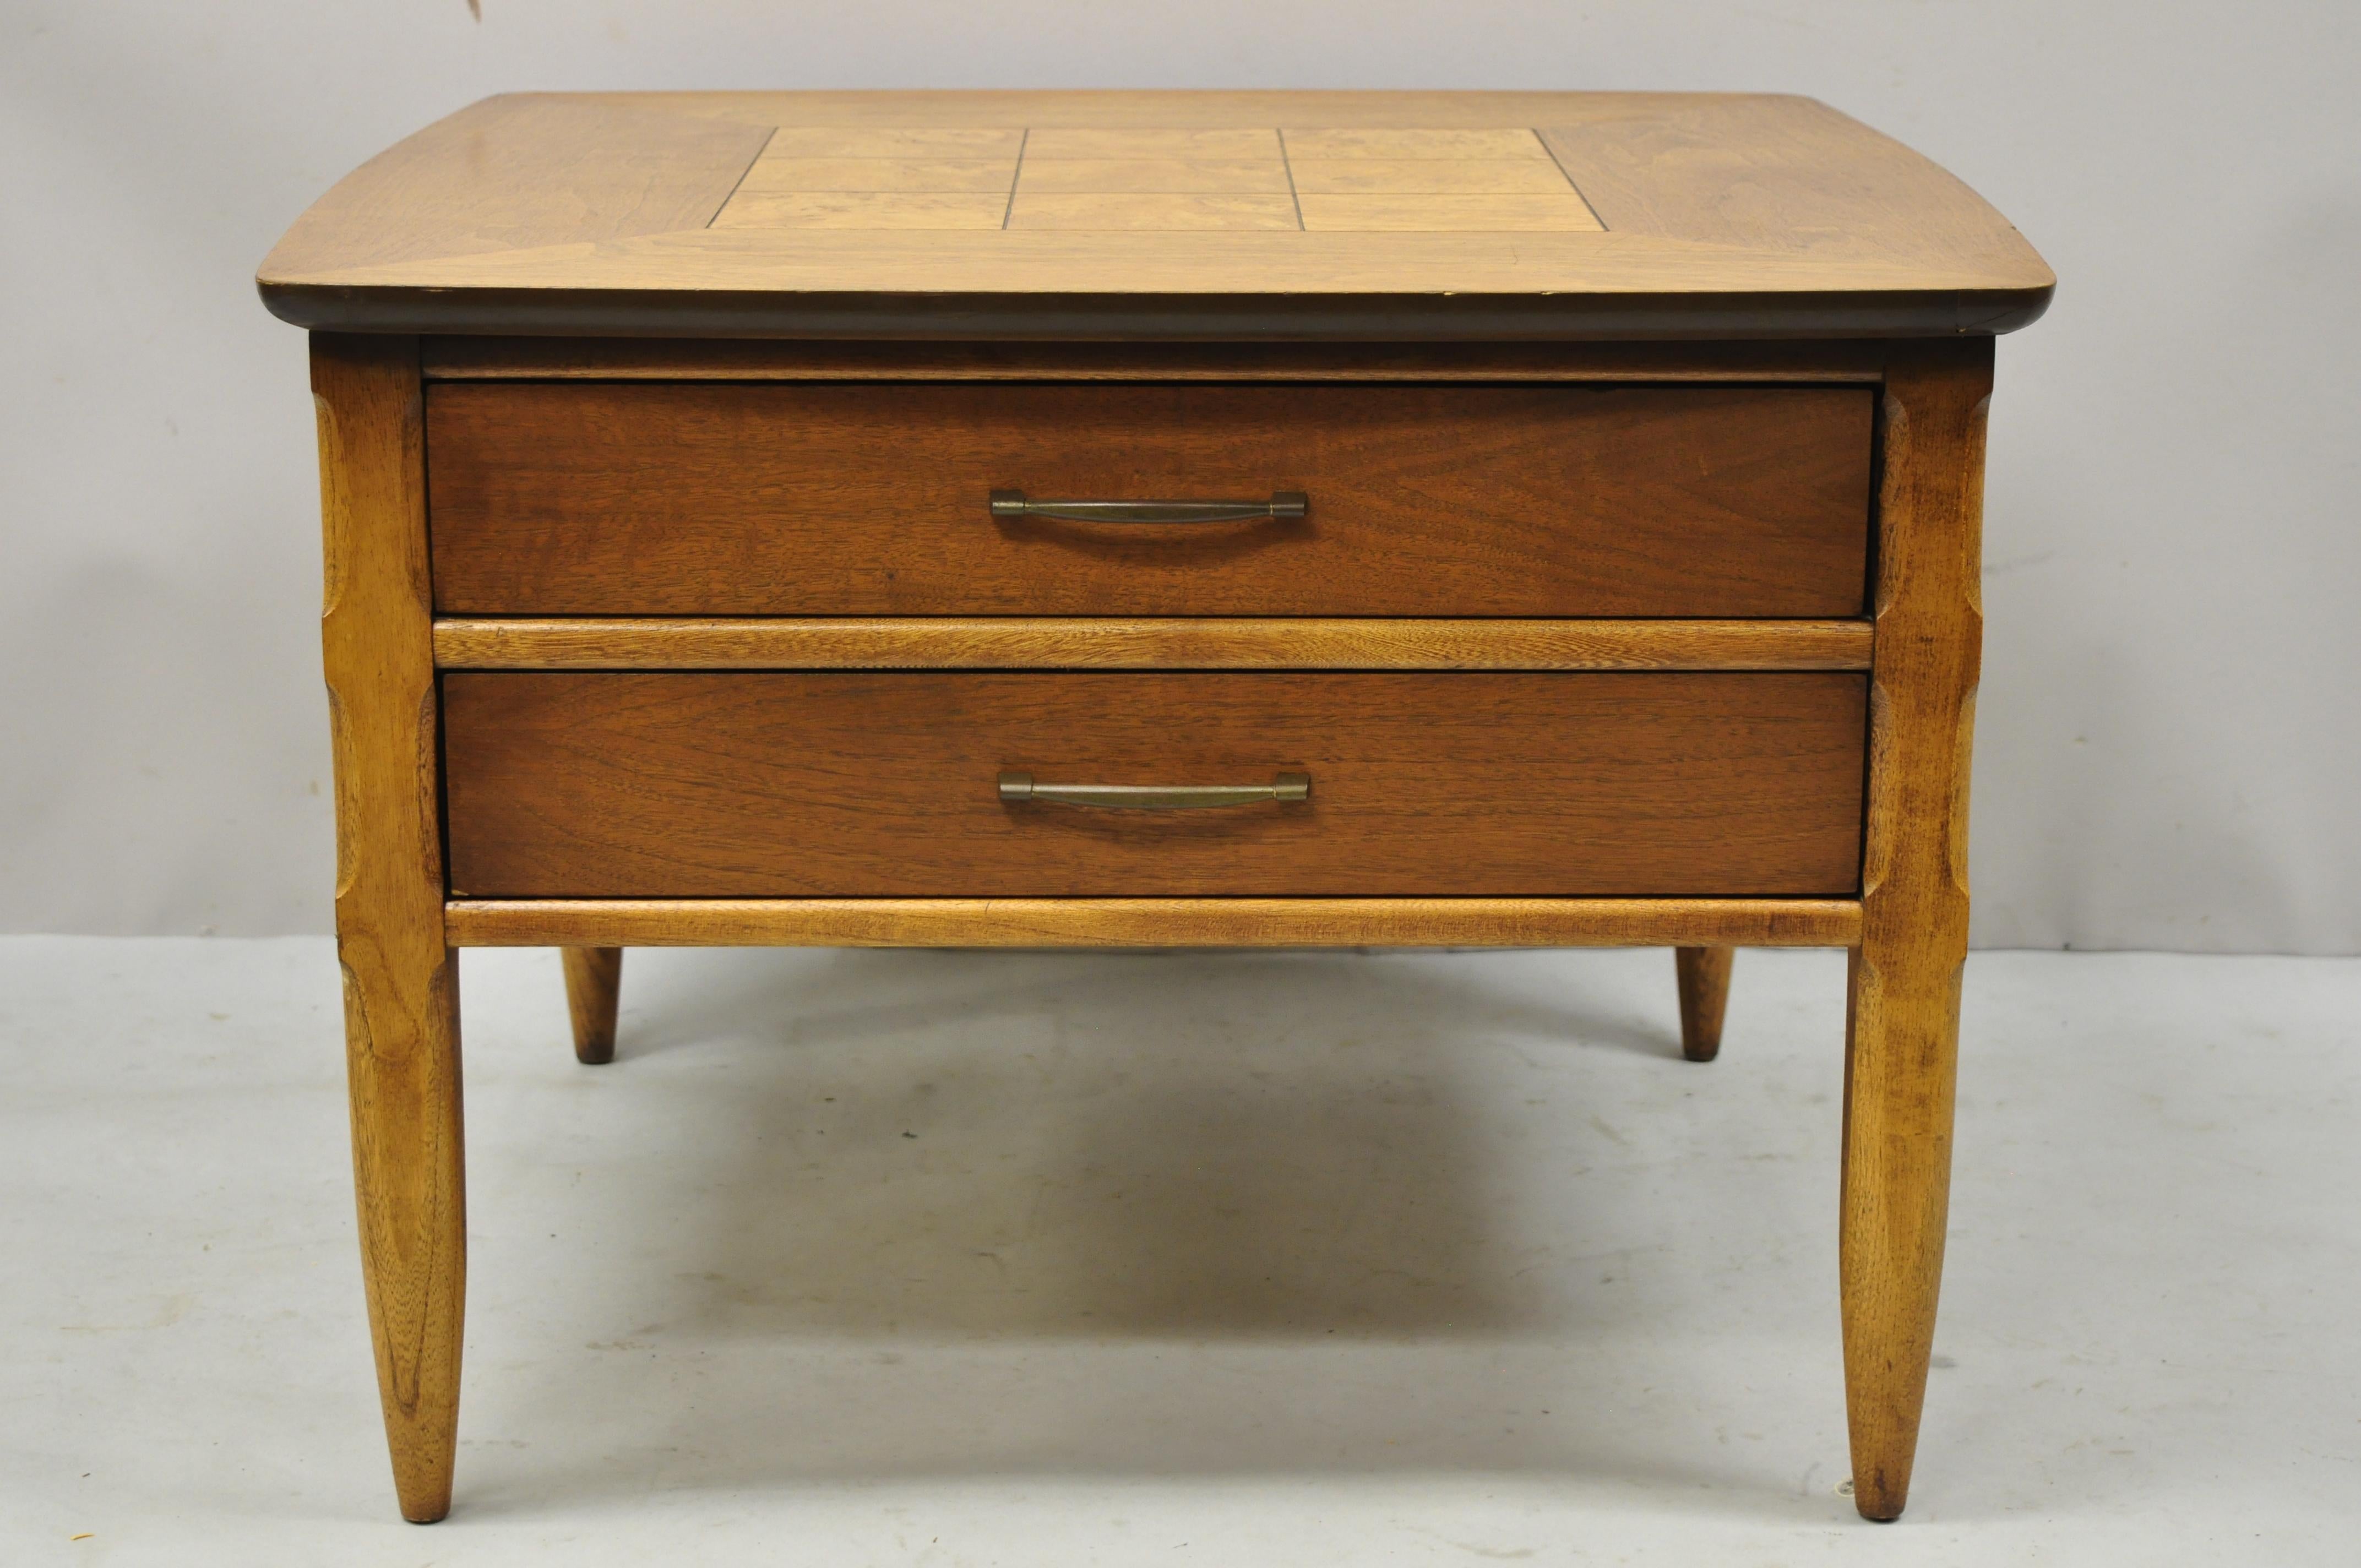 Lane Mid-Century Modern Walnut 2 Drawer Lamp End Table with Burlwood Inlay Top In Good Condition For Sale In Philadelphia, PA